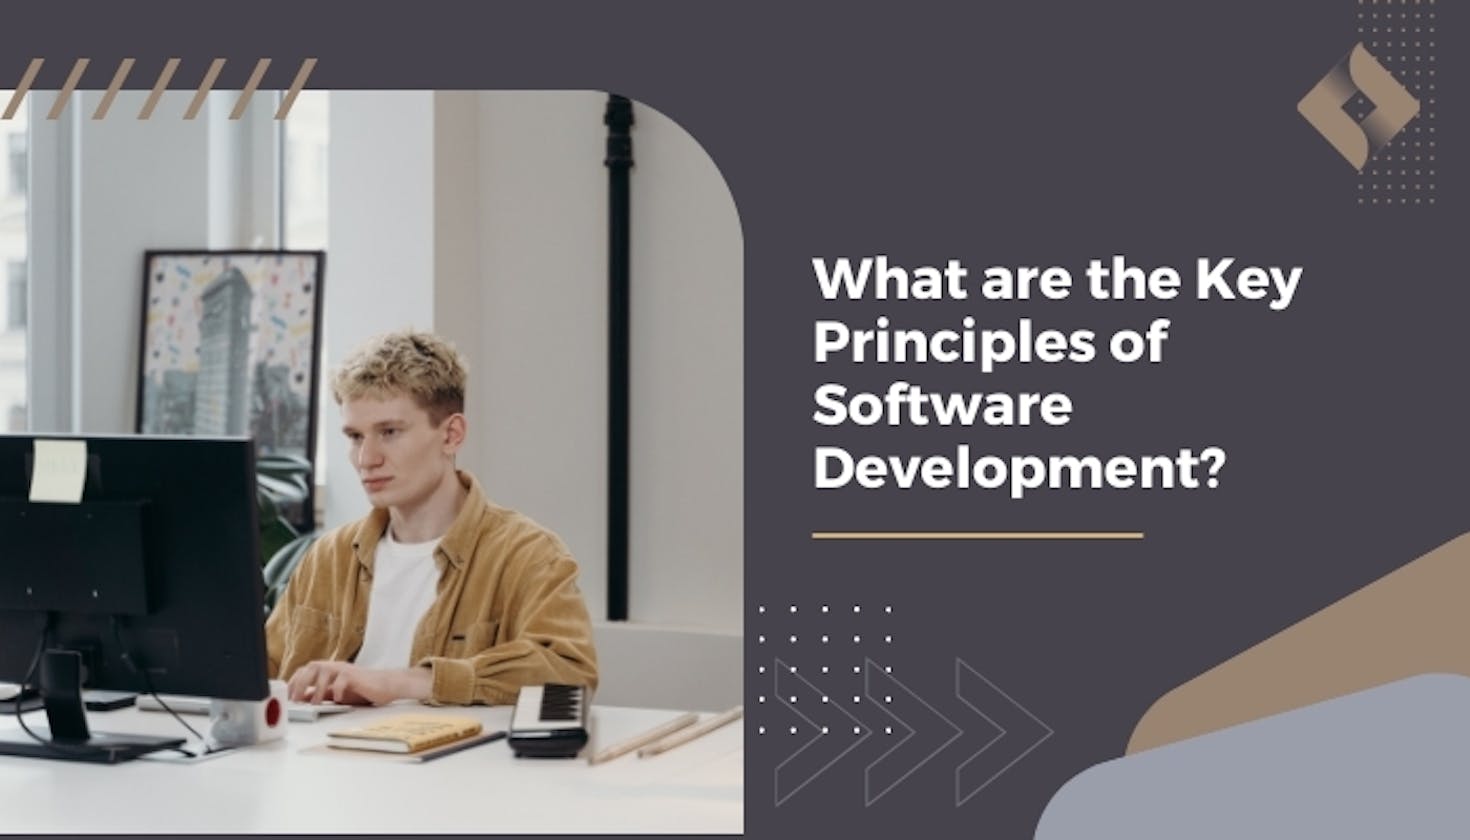 What are the Key Principles of Software Development?